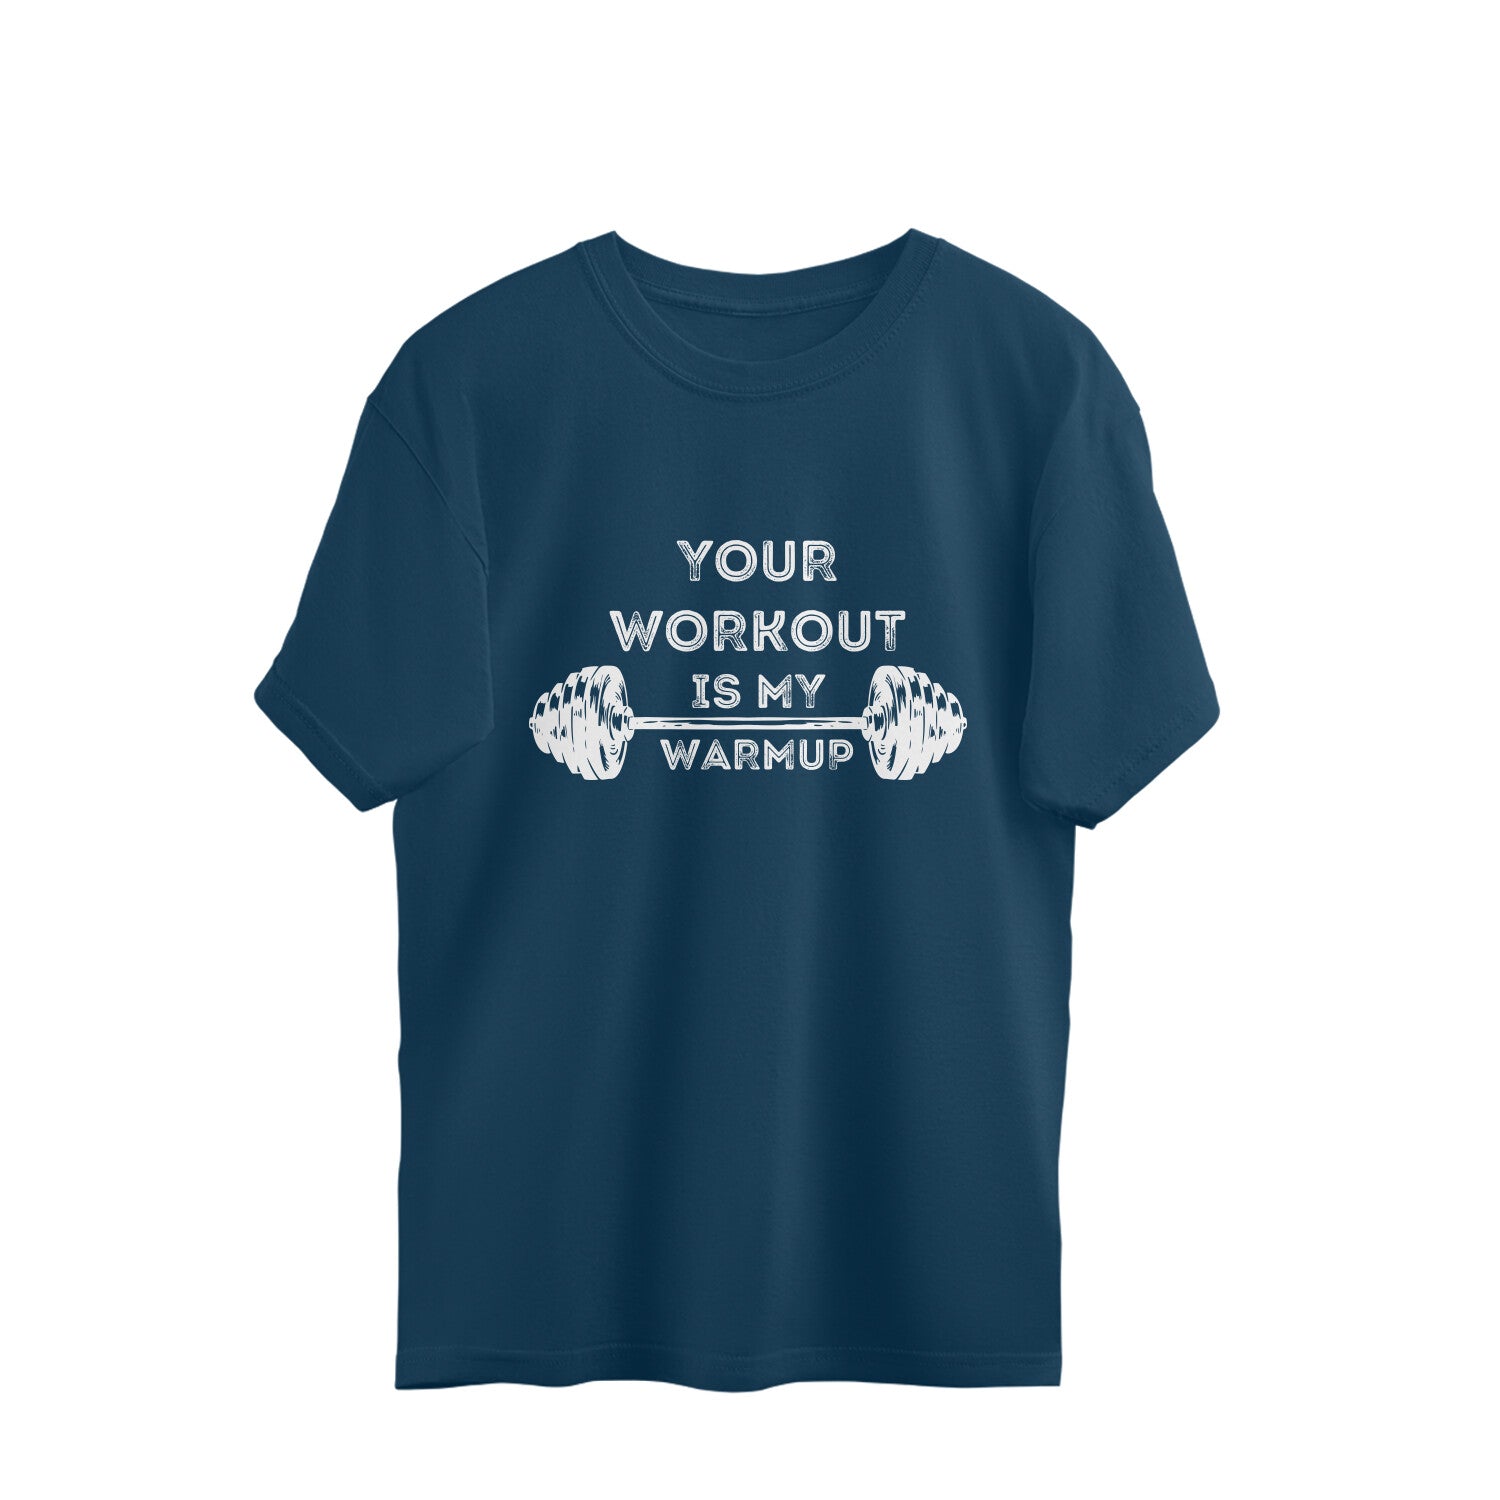 Your workout is my warmup oversized T-shirt